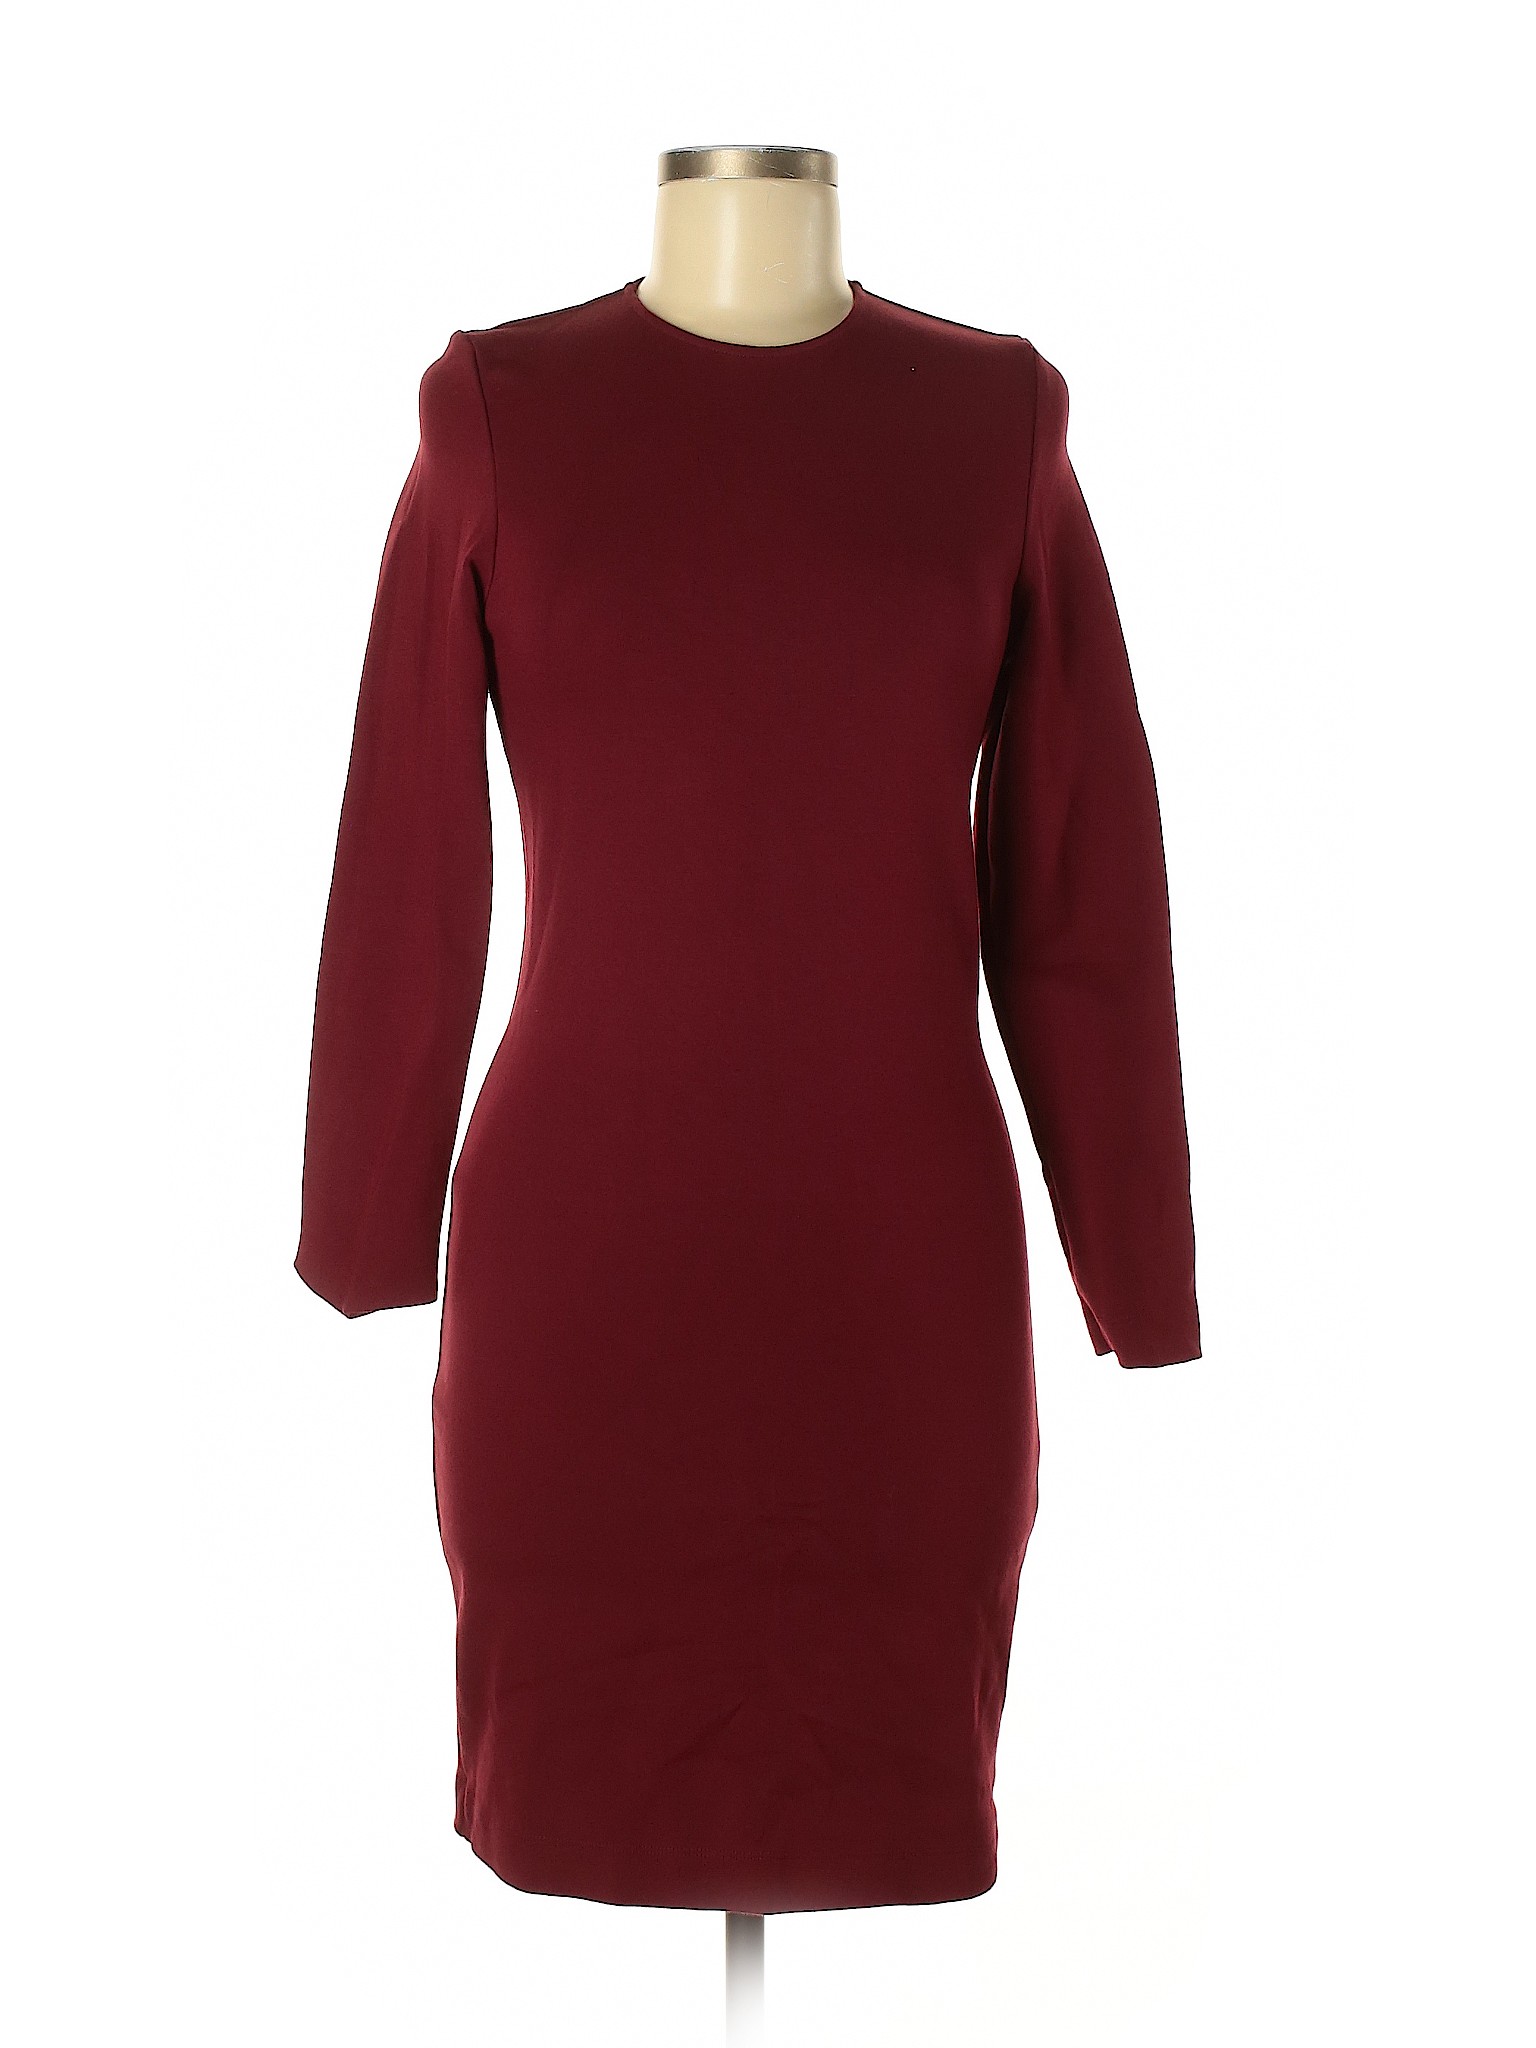 Amour Vert Solid Red Burgundy Casual Dress Size M - 72% off | thredUP